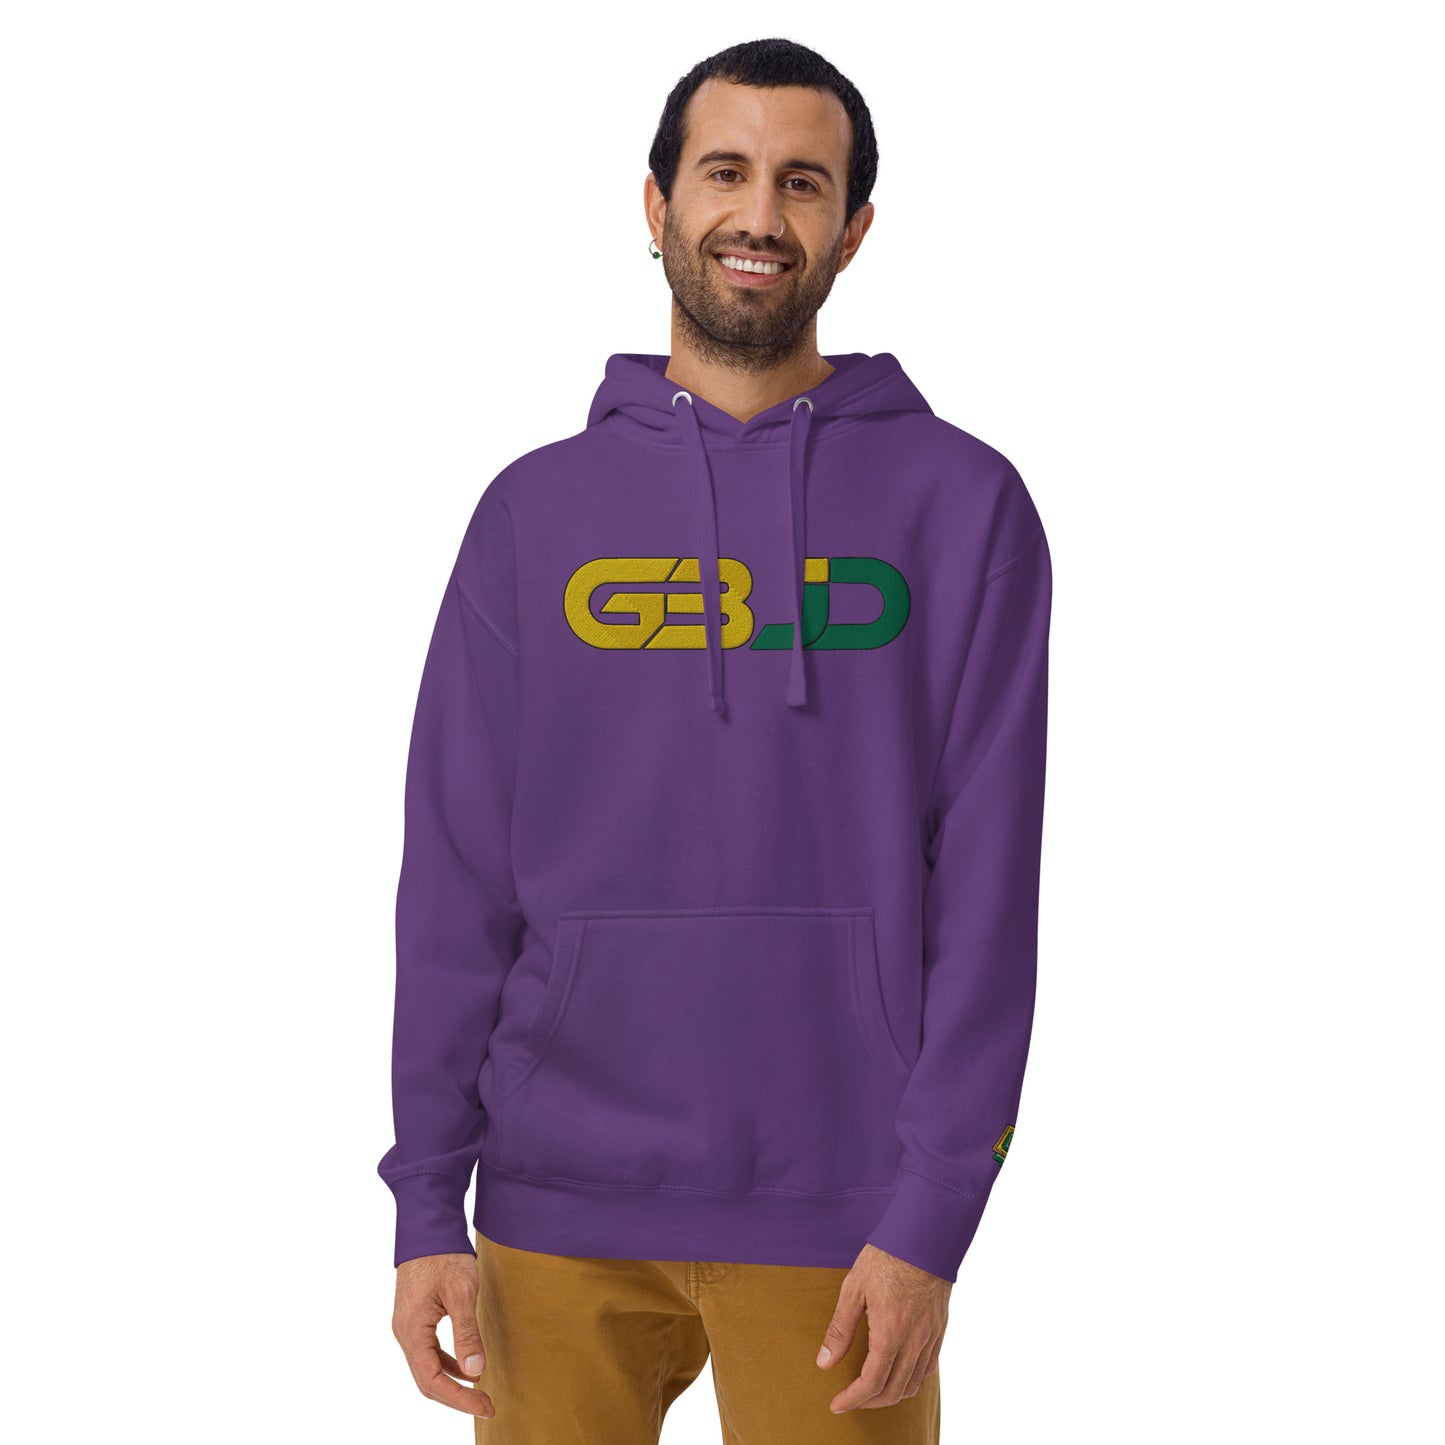 GoldBoys Embroidered GBJD Hoodie